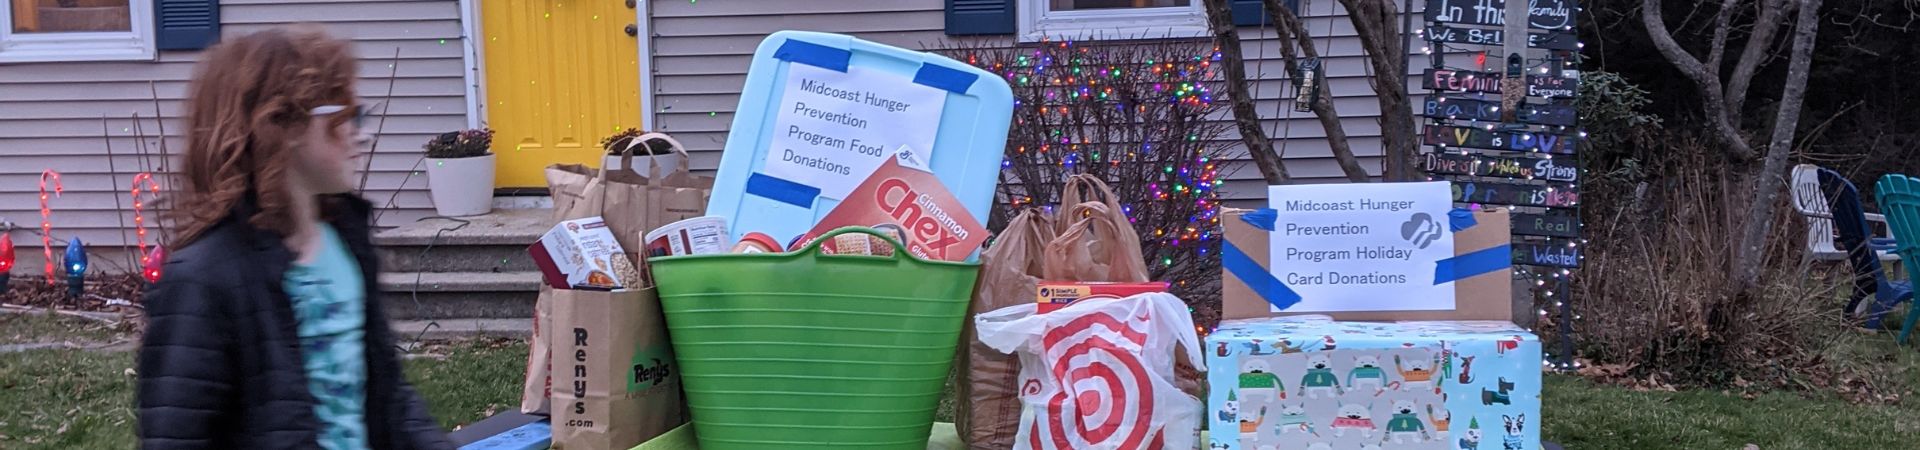  An image of the Midcoast Hunger Prevention Program food and holiday card donations collected by troop 520 